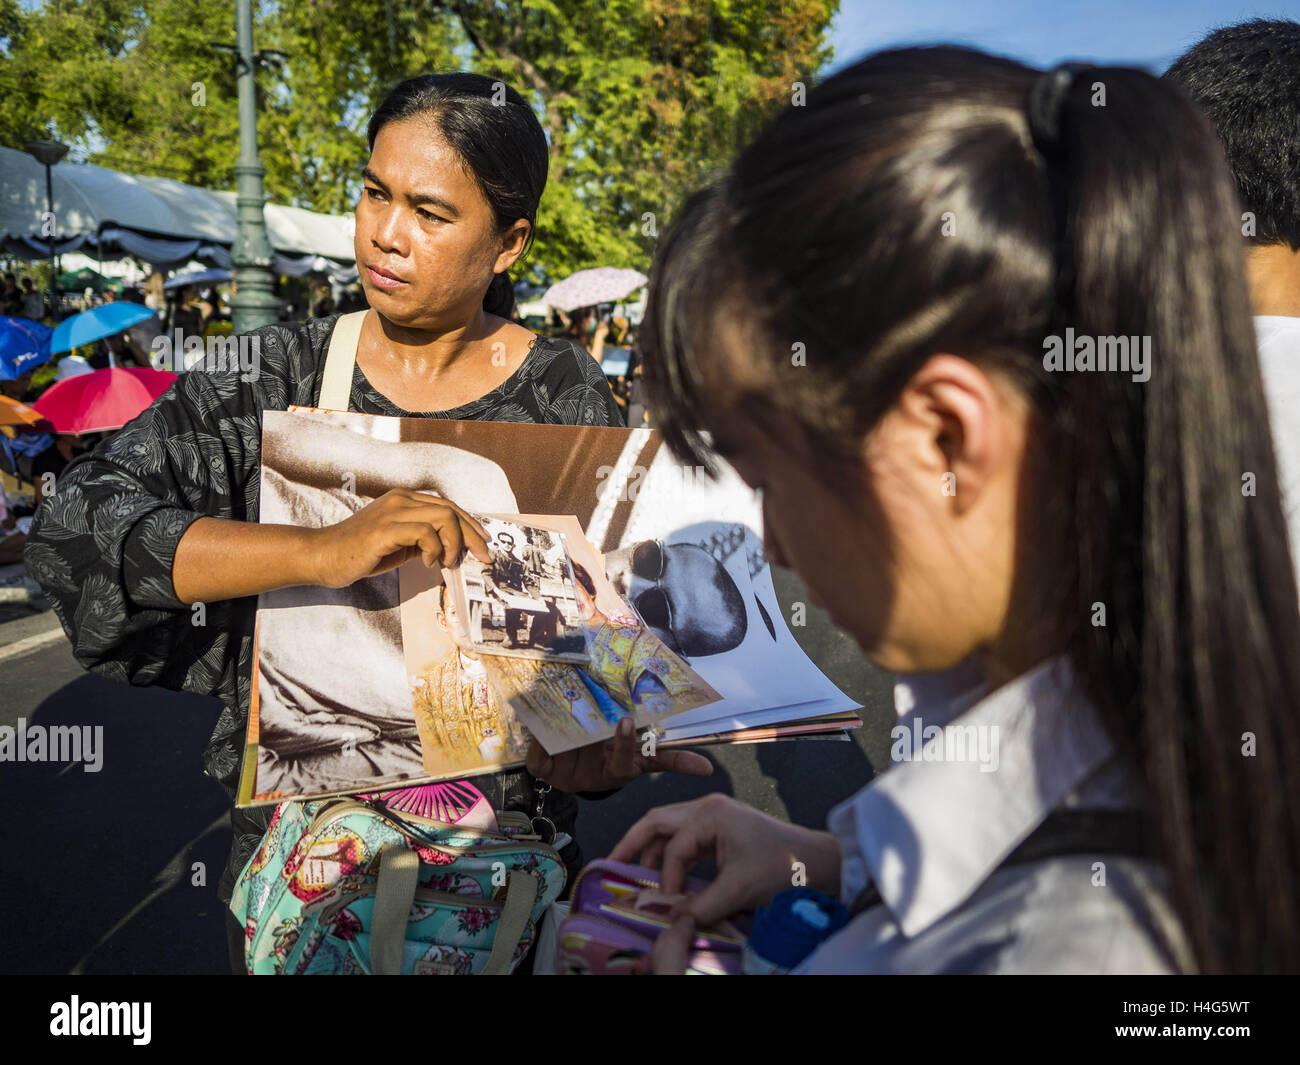 Bangkok, Bangkok, Thailand. 15th Oct, 2016. A woman sells portraits of Bhumibol Adulyadej, the King of Thailand, on a street in front of the Grand Palace in Bangkok. King Bhumibol Adulyadej died Oct. 13, 2016. He was 88. His death comes after a period of failing health. With the king's death, the world's longest-reigning monarch is Queen Elizabeth II, who ascended to the British throne in 1952. Bhumibol Adulyadej, was born in Cambridge, MA, on 5 December 1927. He was the ninth monarch of Thailand from the Chakri Dynasty and is known as Rama IX. He became King on June 9, 1946 and served as Stock Photo